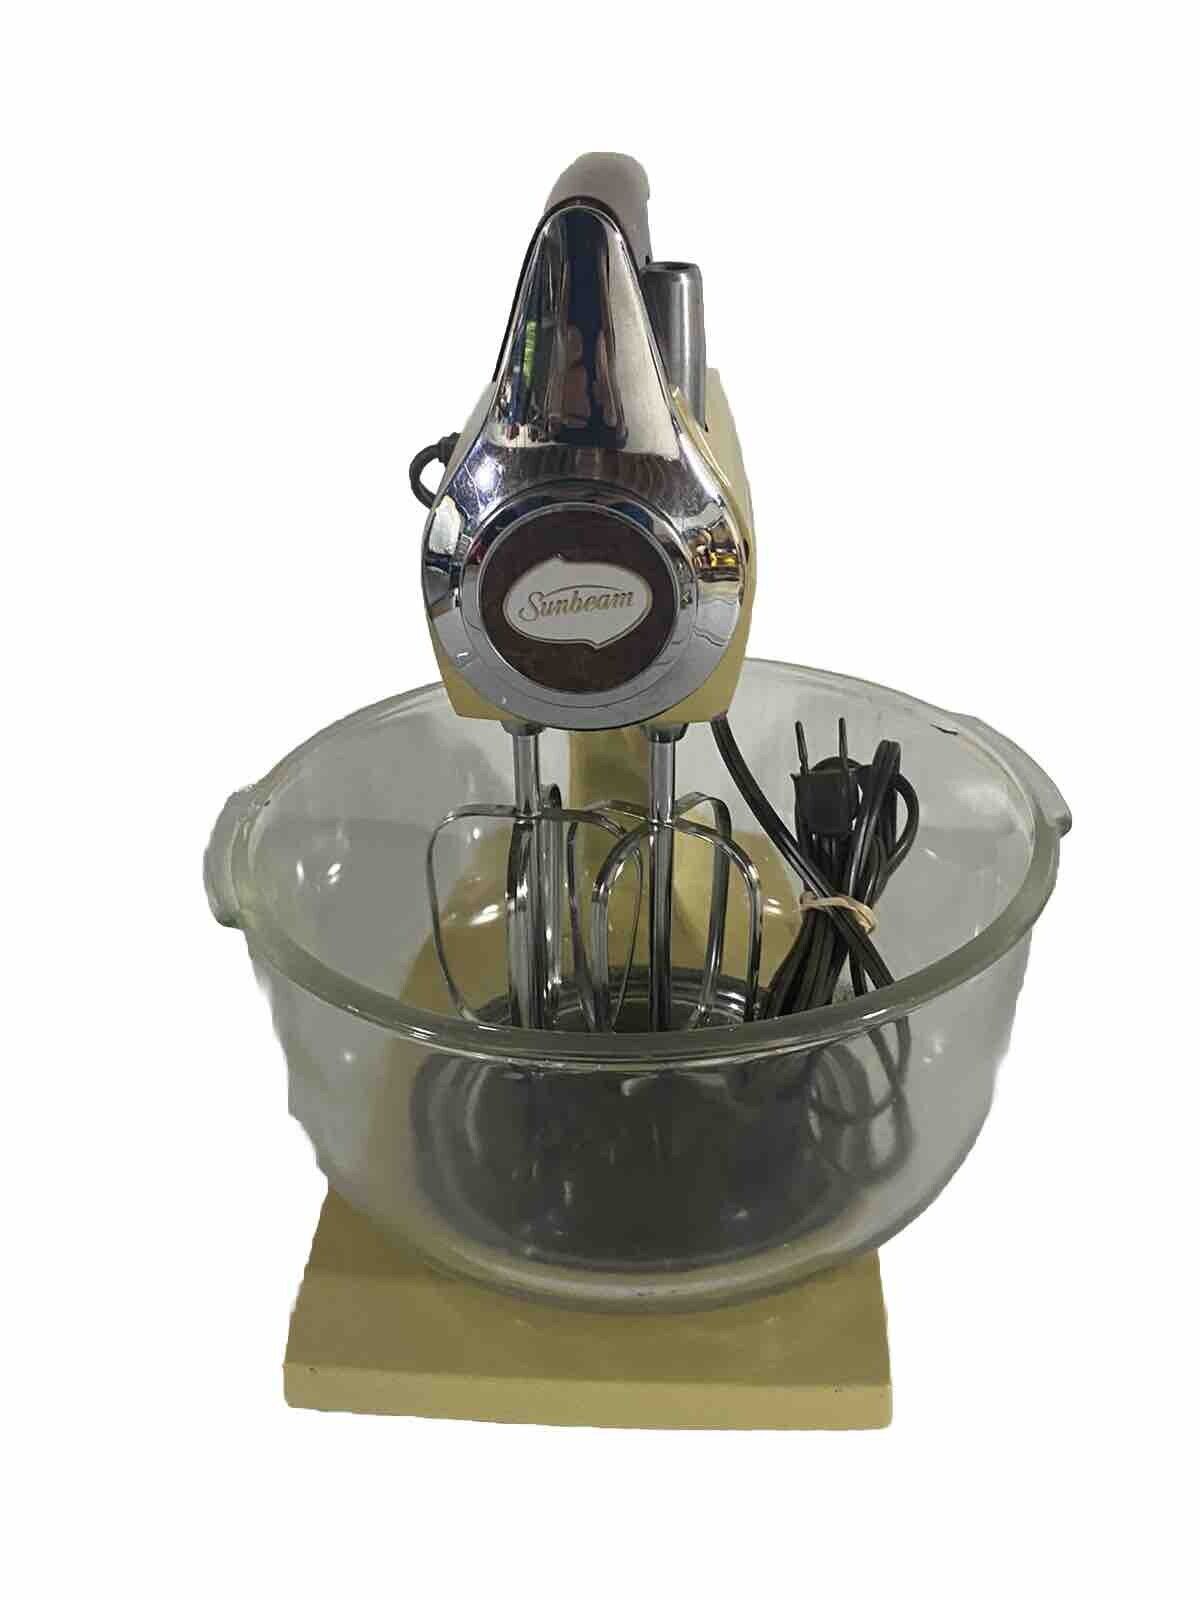 Sunbeam Mixmaster Stand Mixer  VTG 1-7A 12 Speed 1 Lg Bowl 1  Preowned Good Con